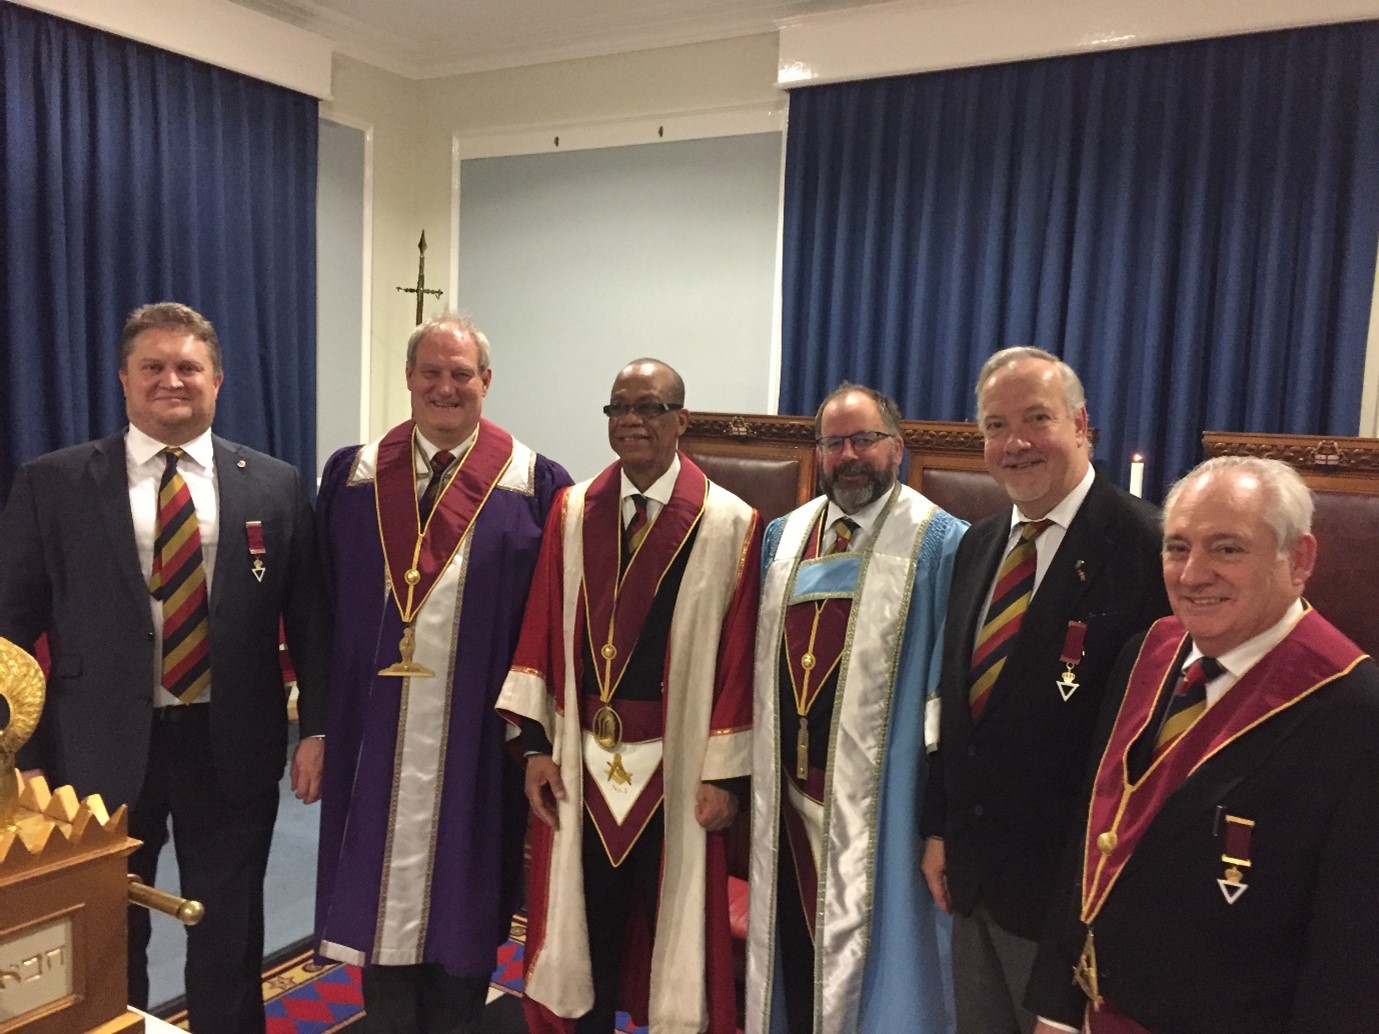 Tremendous Day at the Grand Master’s Council No. 1